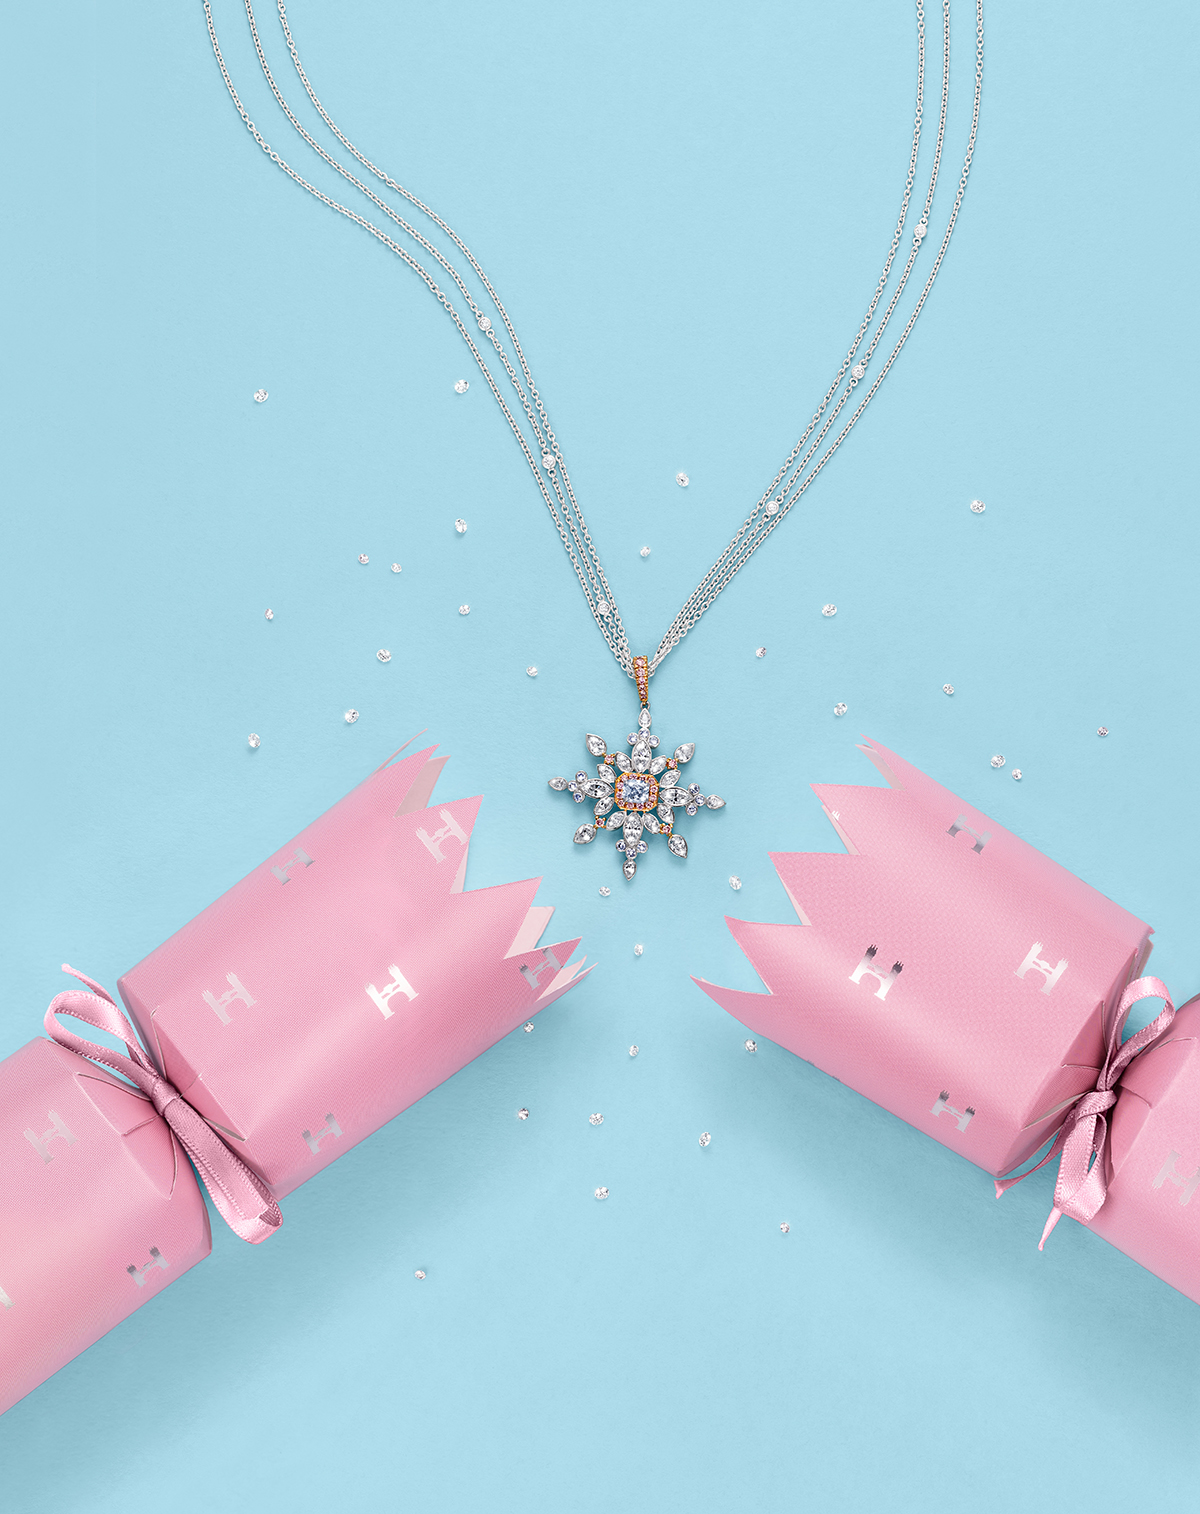 Image of a necklace in the middle of a christmas cracker